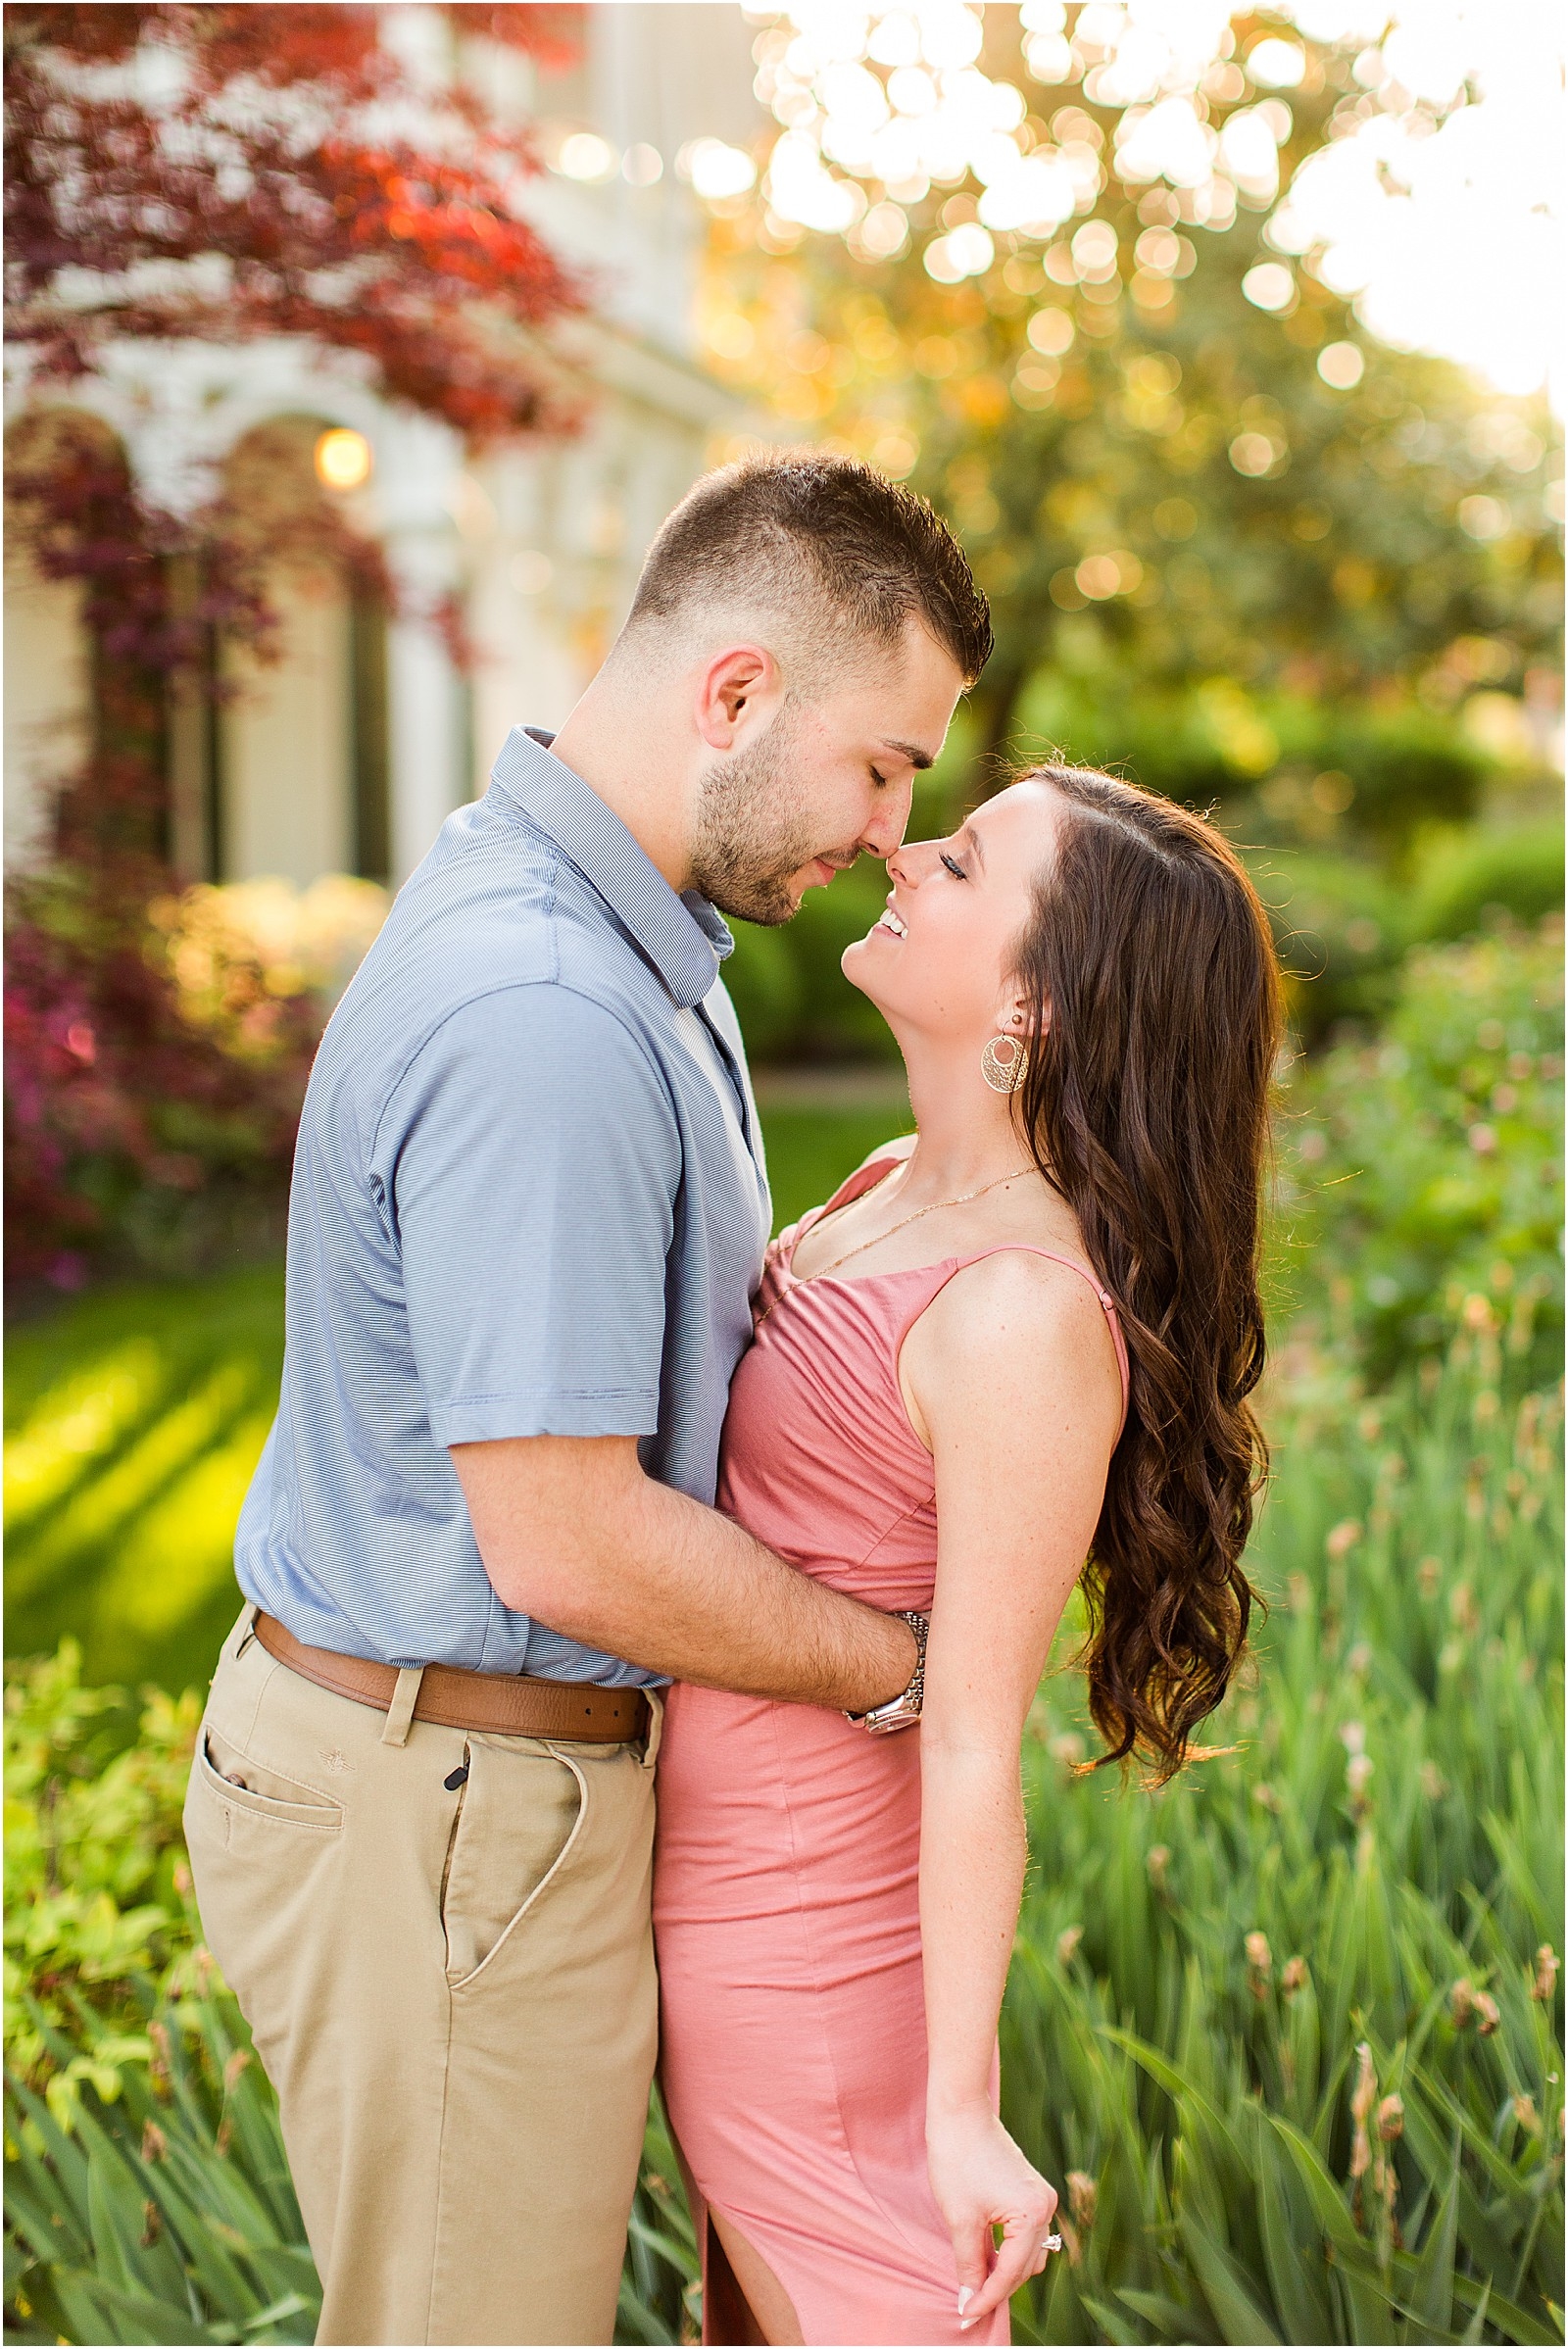 Downtown Newburgh Engagement Session | Matt and Blaire | Bret and Brandie Photography018.jpg